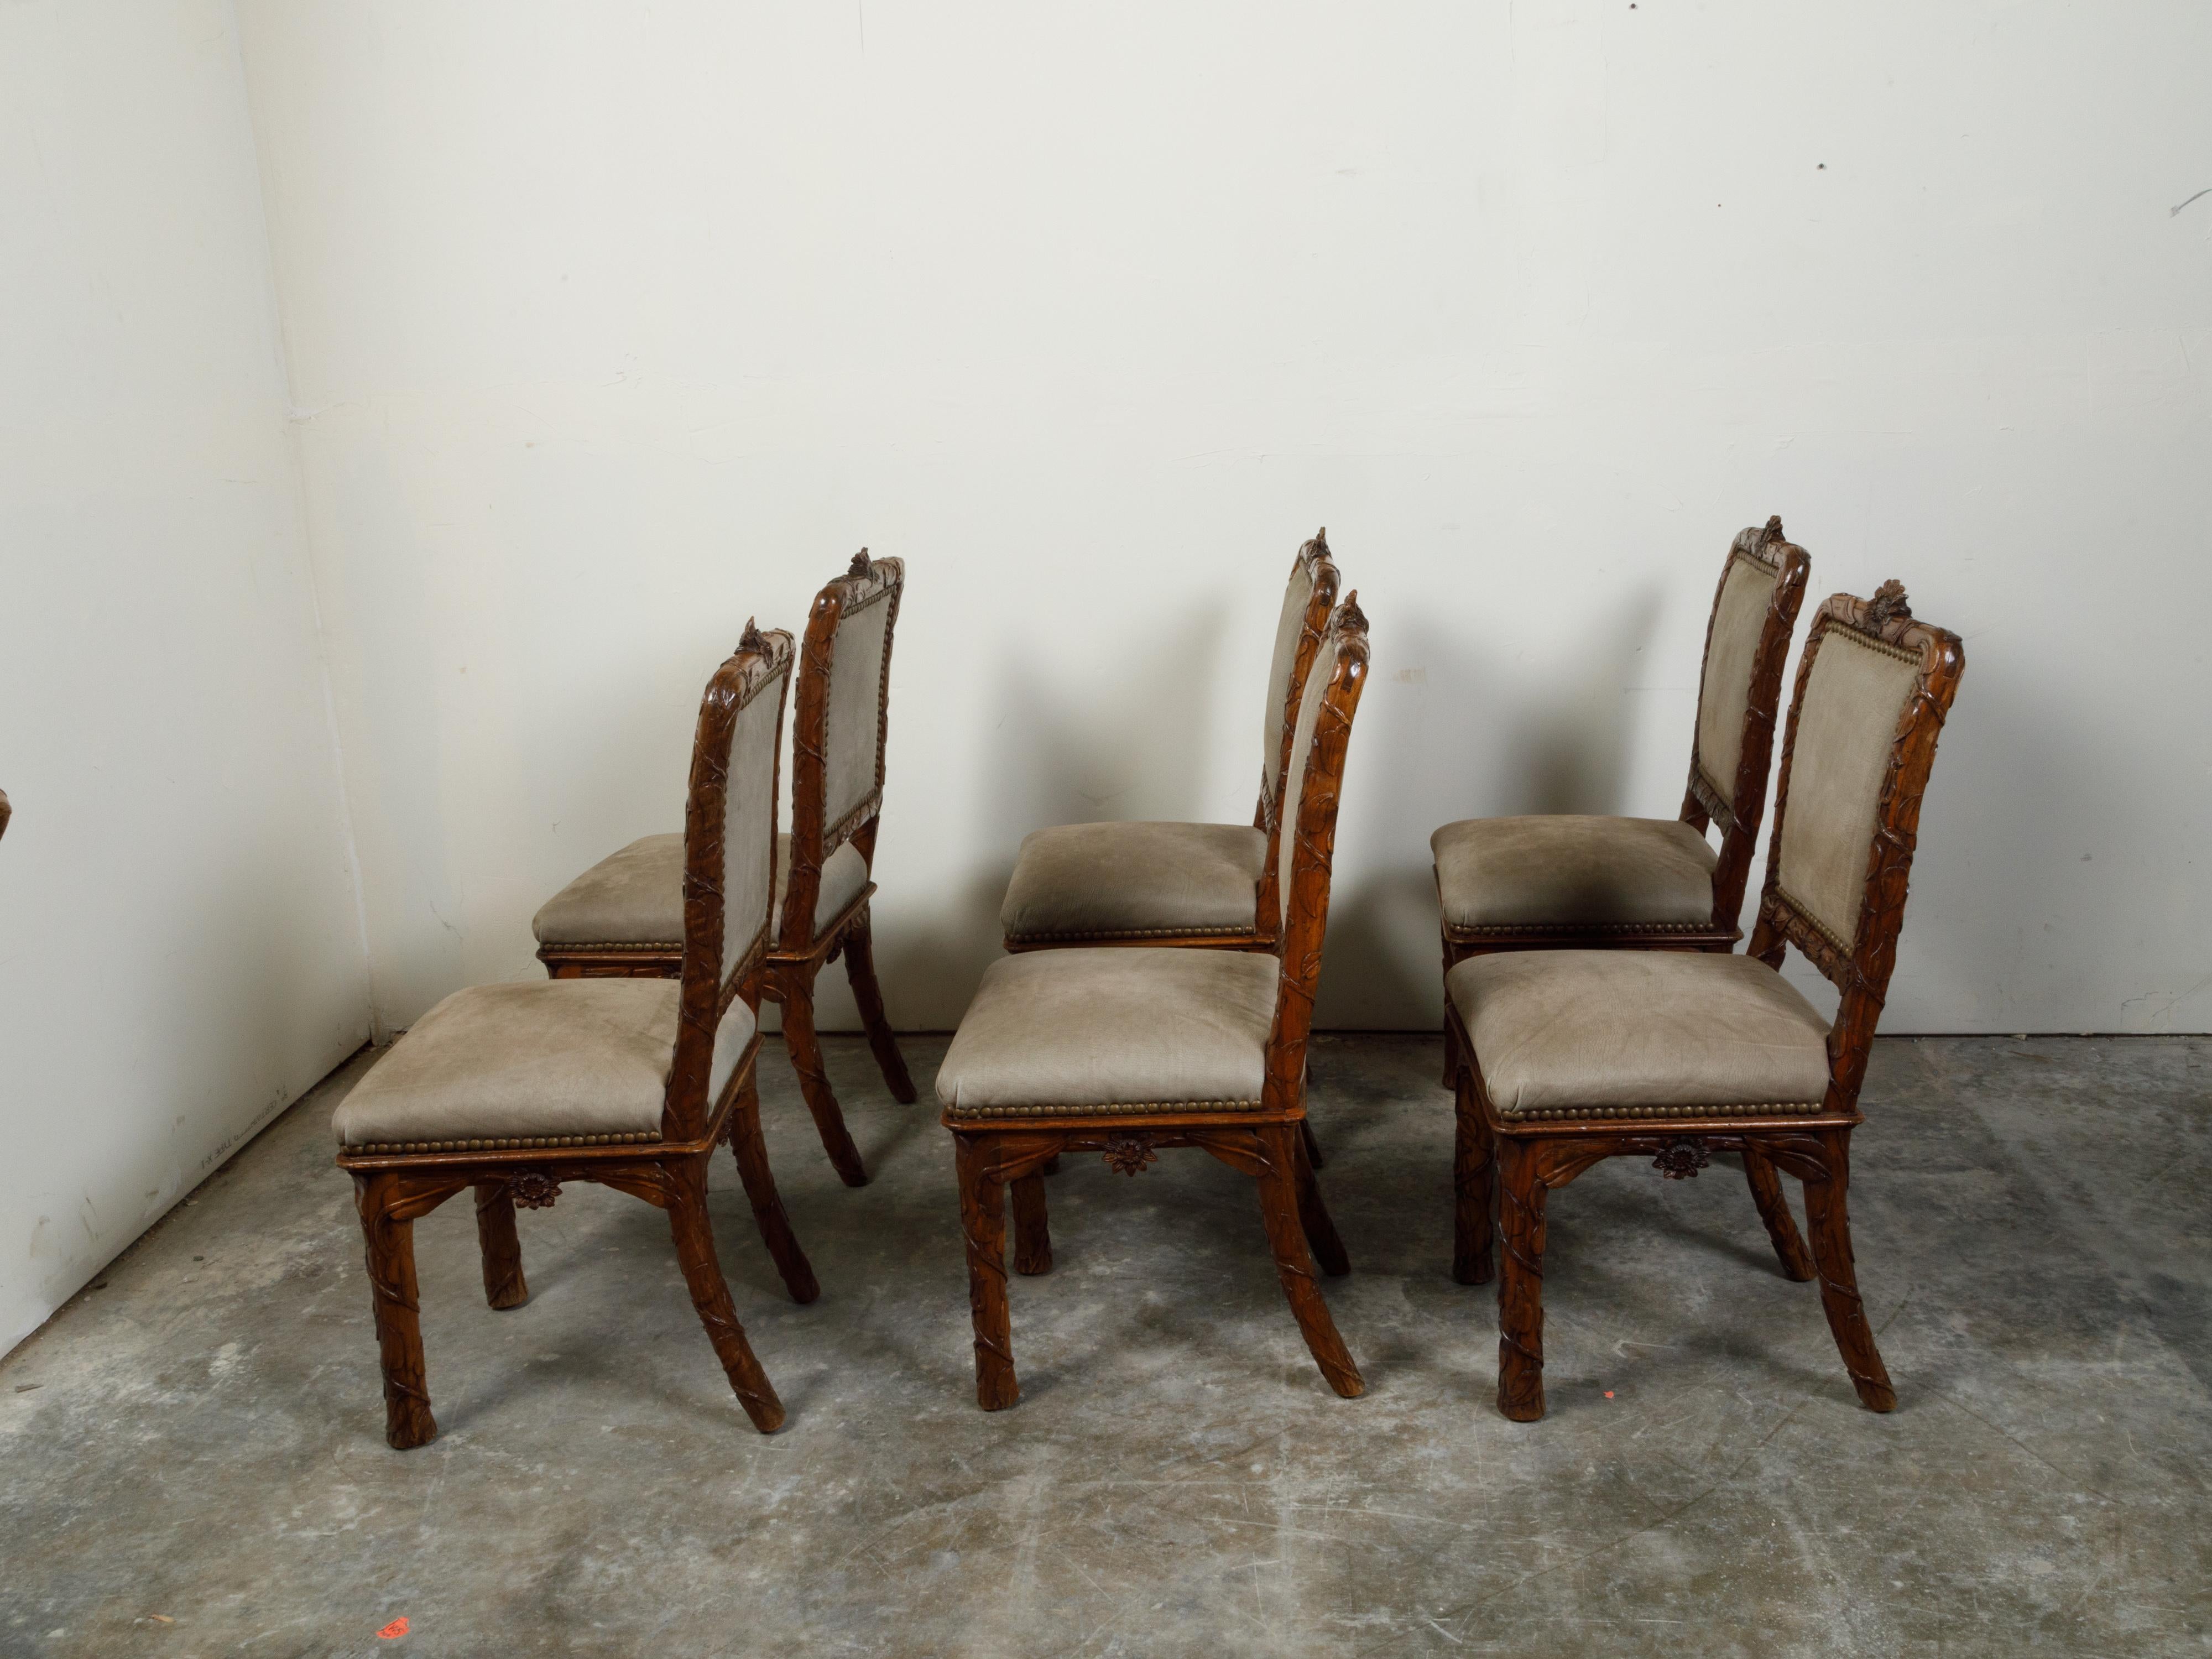 Upholstery Set of Eight 1920s Black Forest Dining Room Chairs with Hand-Carved Floral Décor For Sale